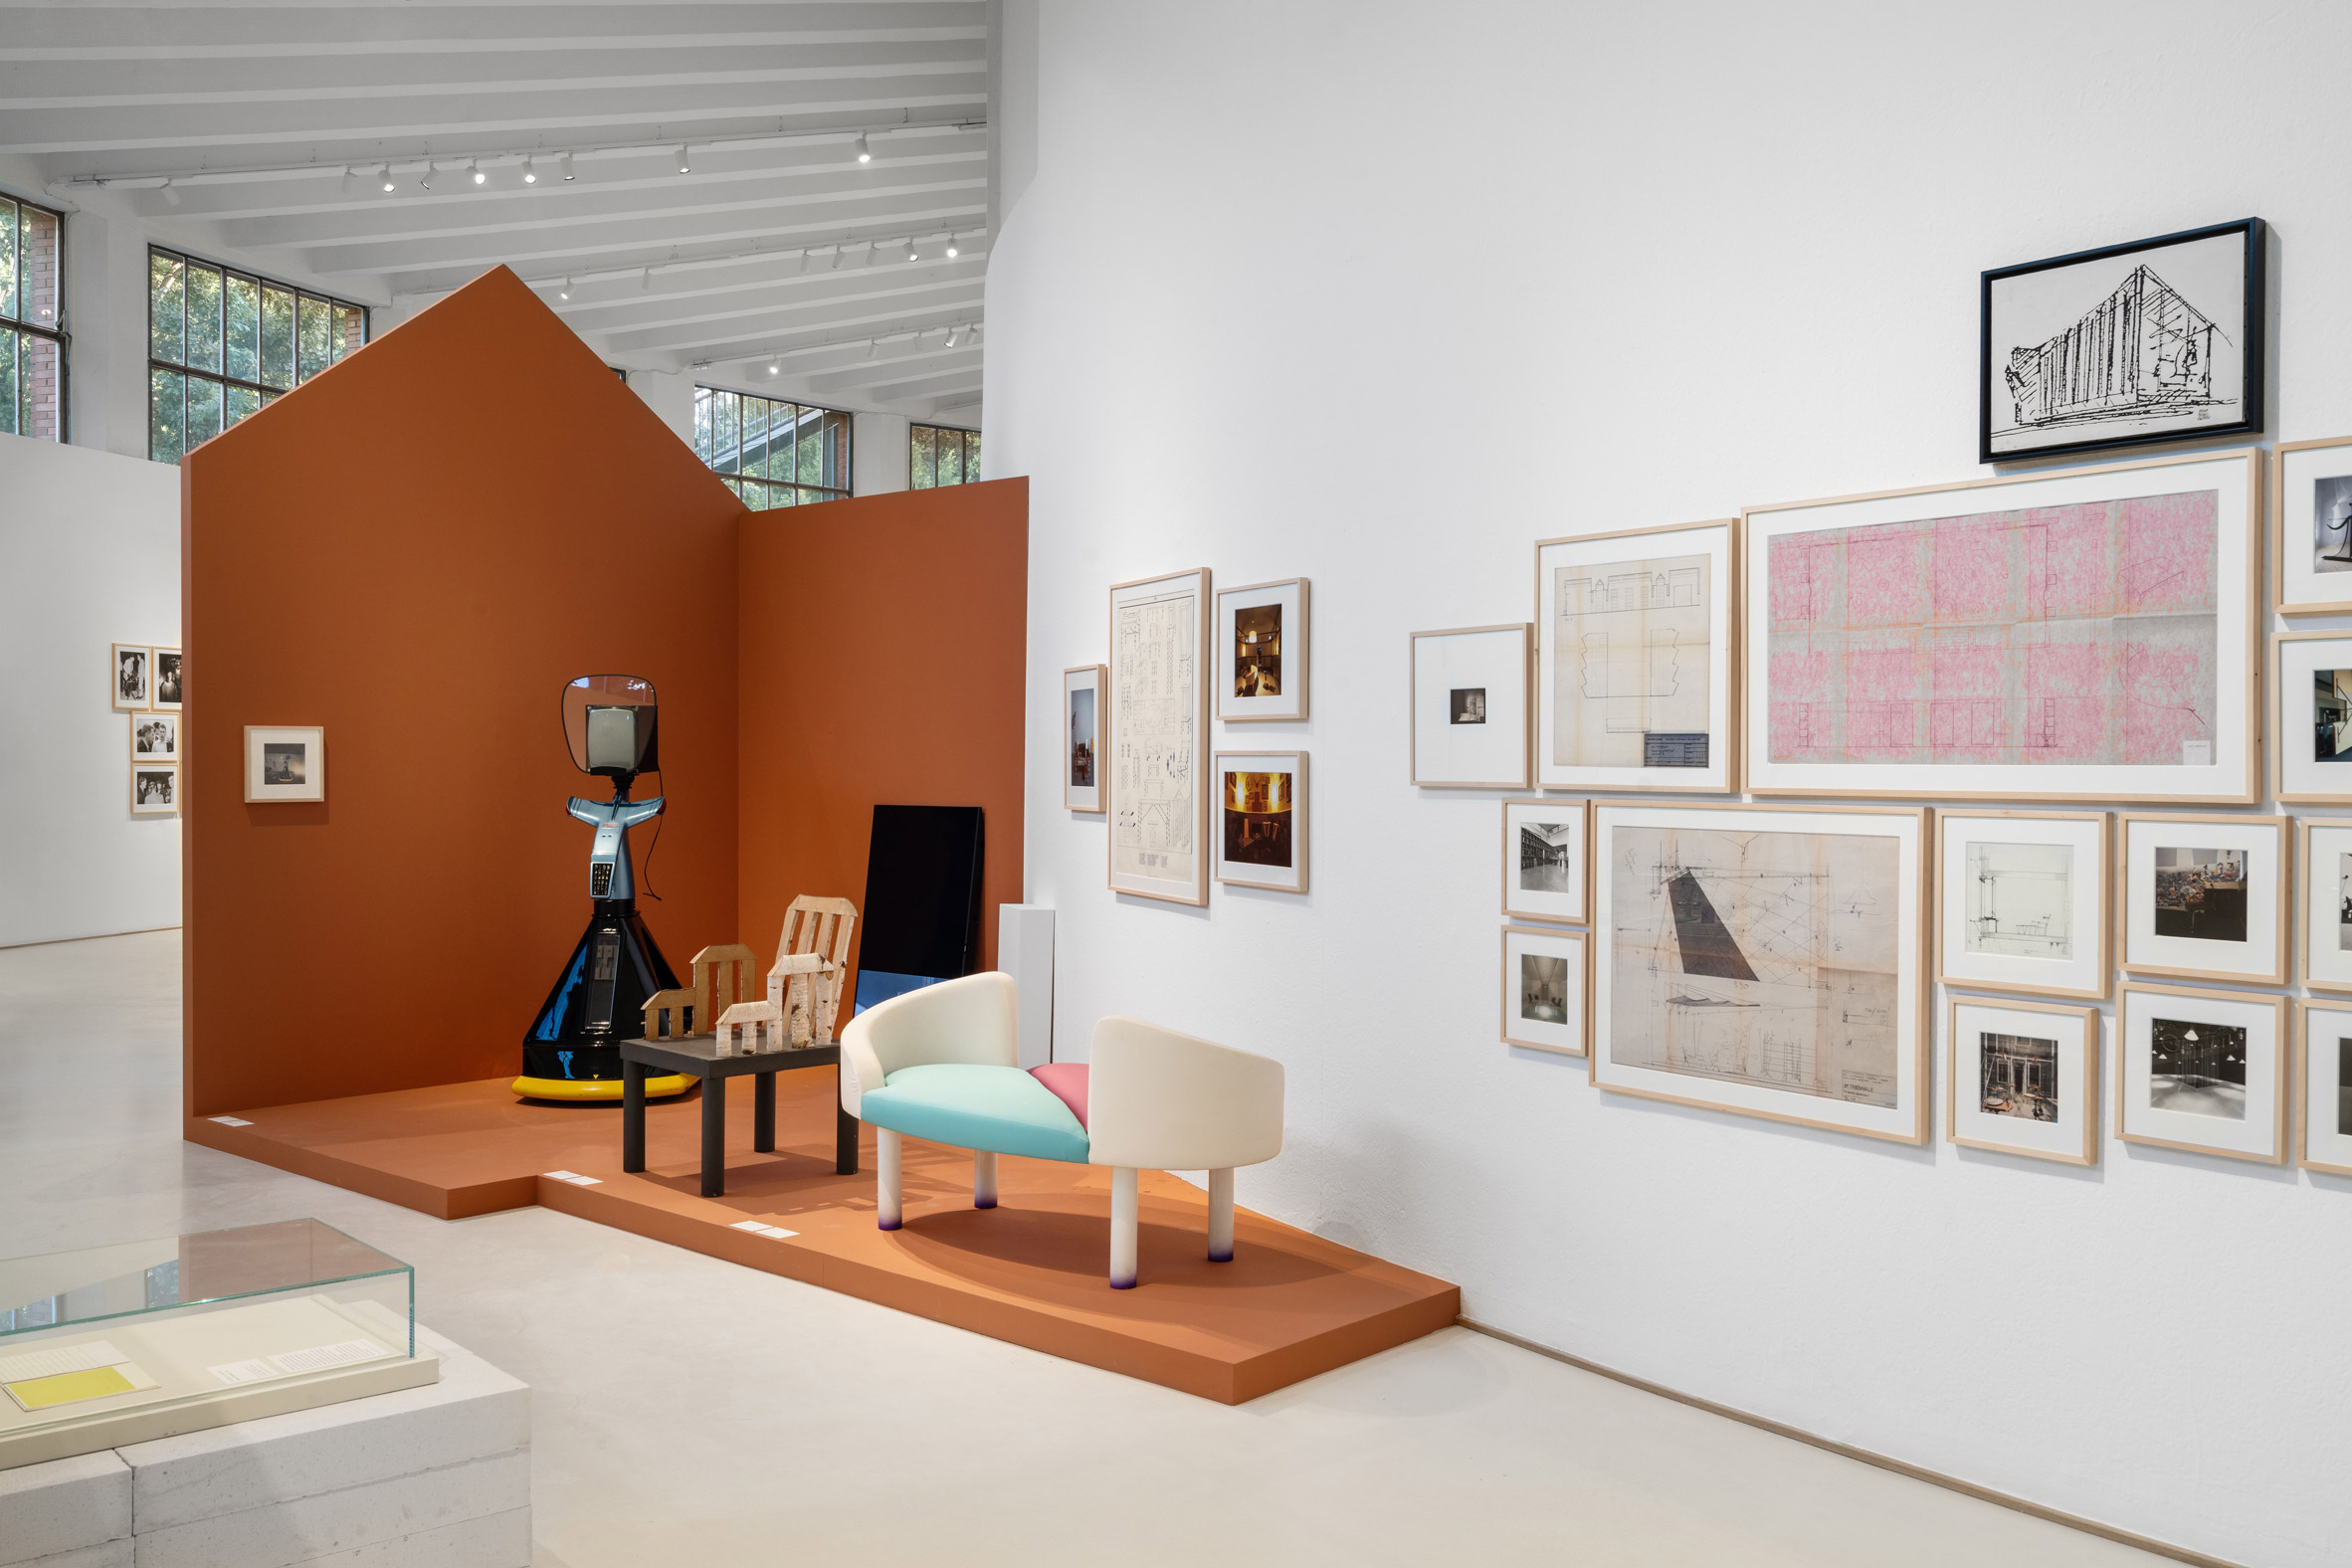 An exhibition showcasing the work of Italian designers, including chairs and artworks